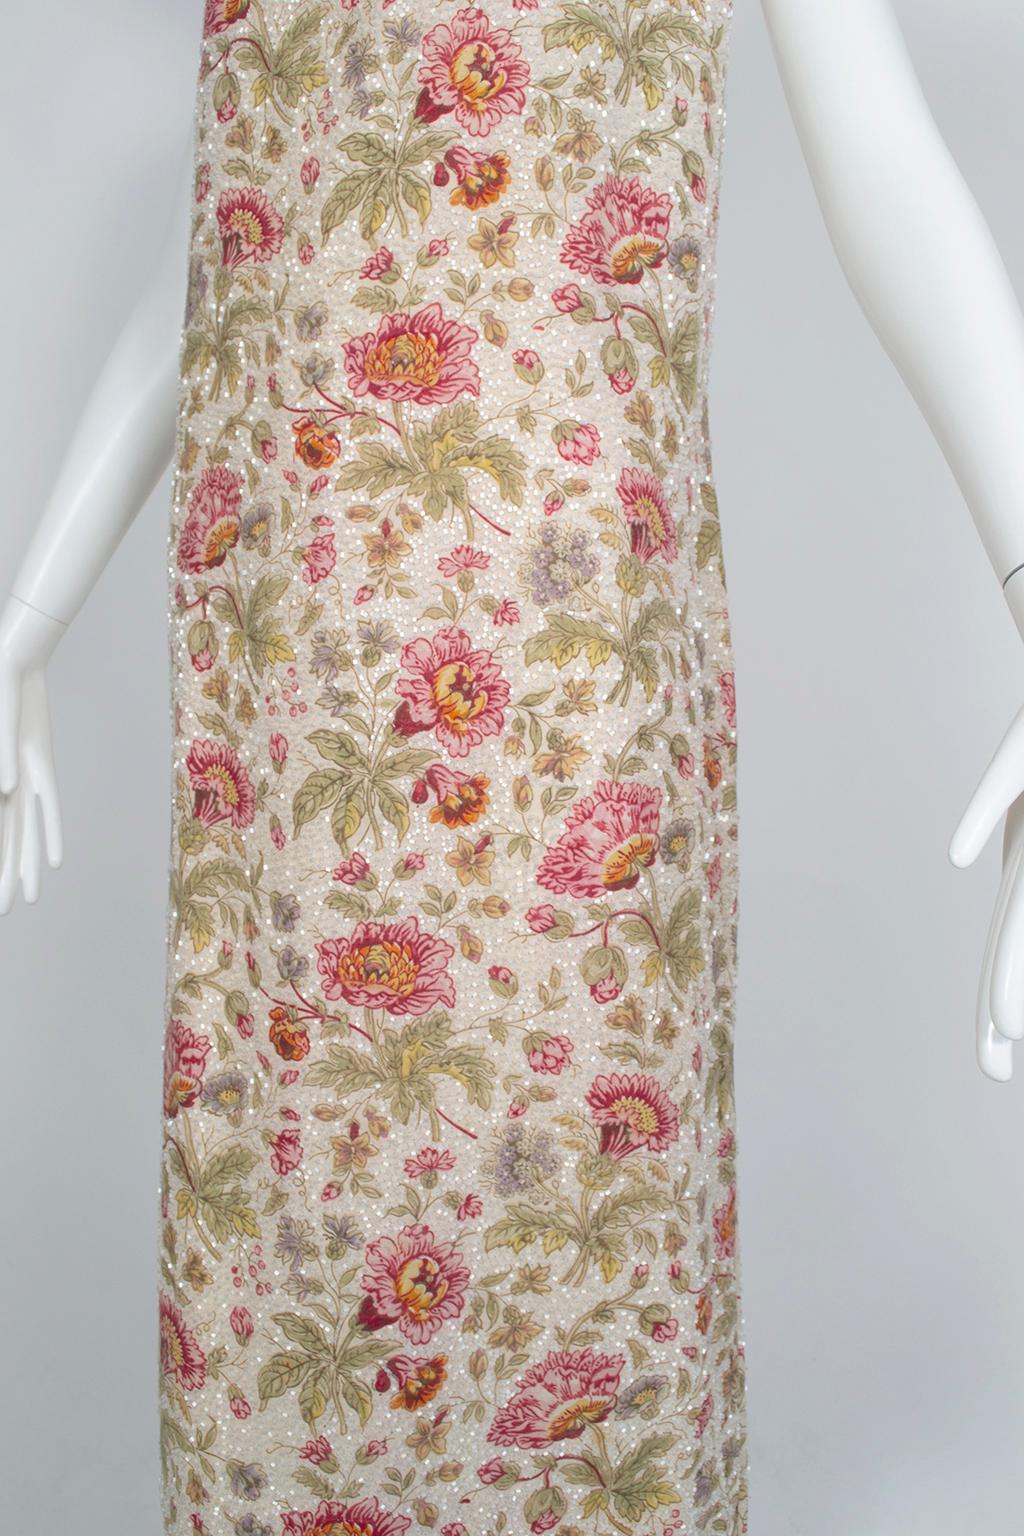 Brown Sleeveless Plum Floral Glass Bead Sack Dress with Gold Piping - M, 1920s For Sale